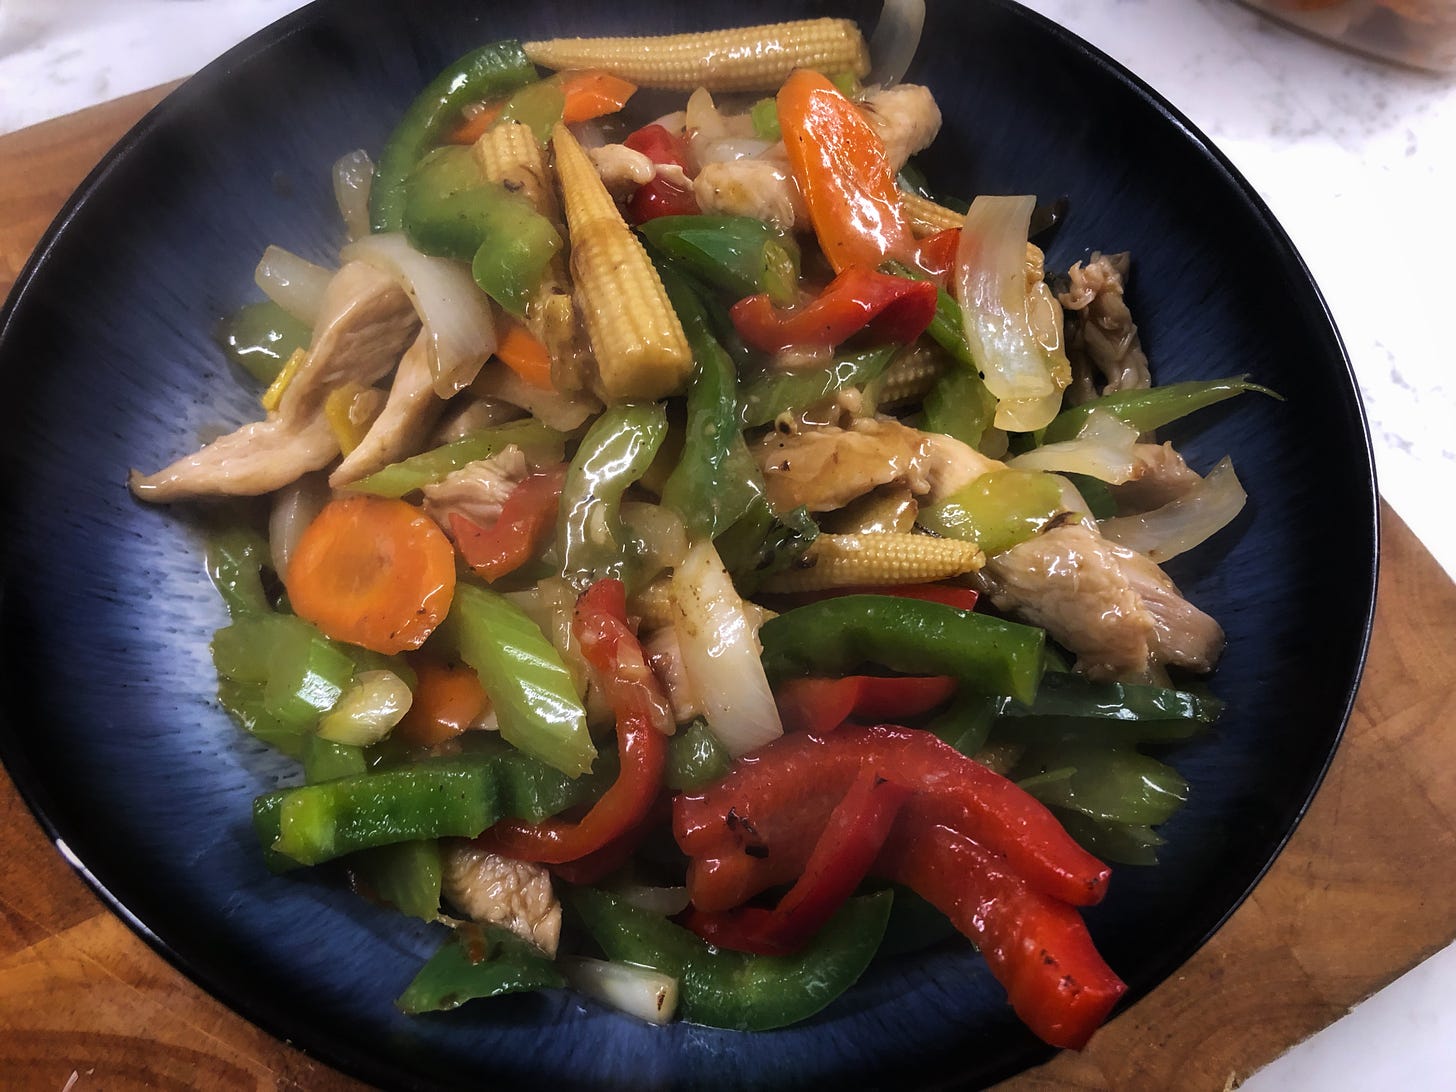 A large bowl filled with stir-fried chicken and vegetables including red and green pepper, onion, carrot, baby corn, celery, and green onion